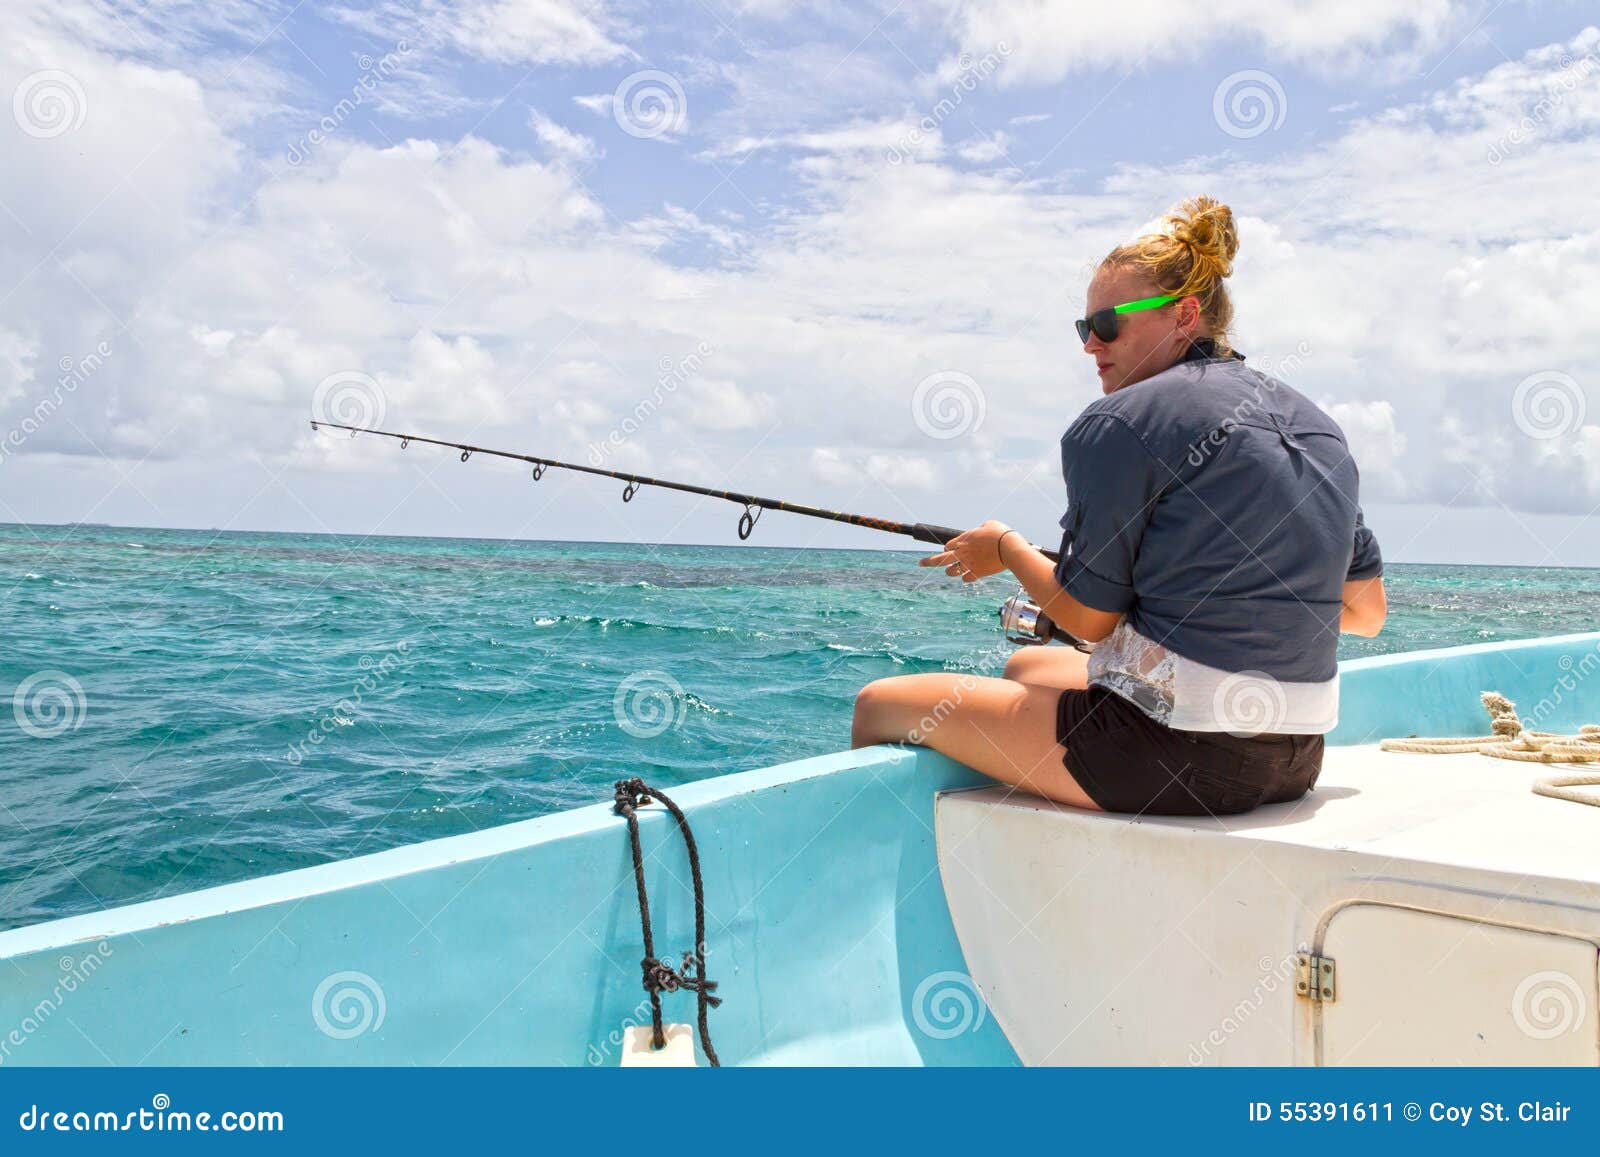 Woman deep sea fishing from the side of a boat on the ocean under blue ...